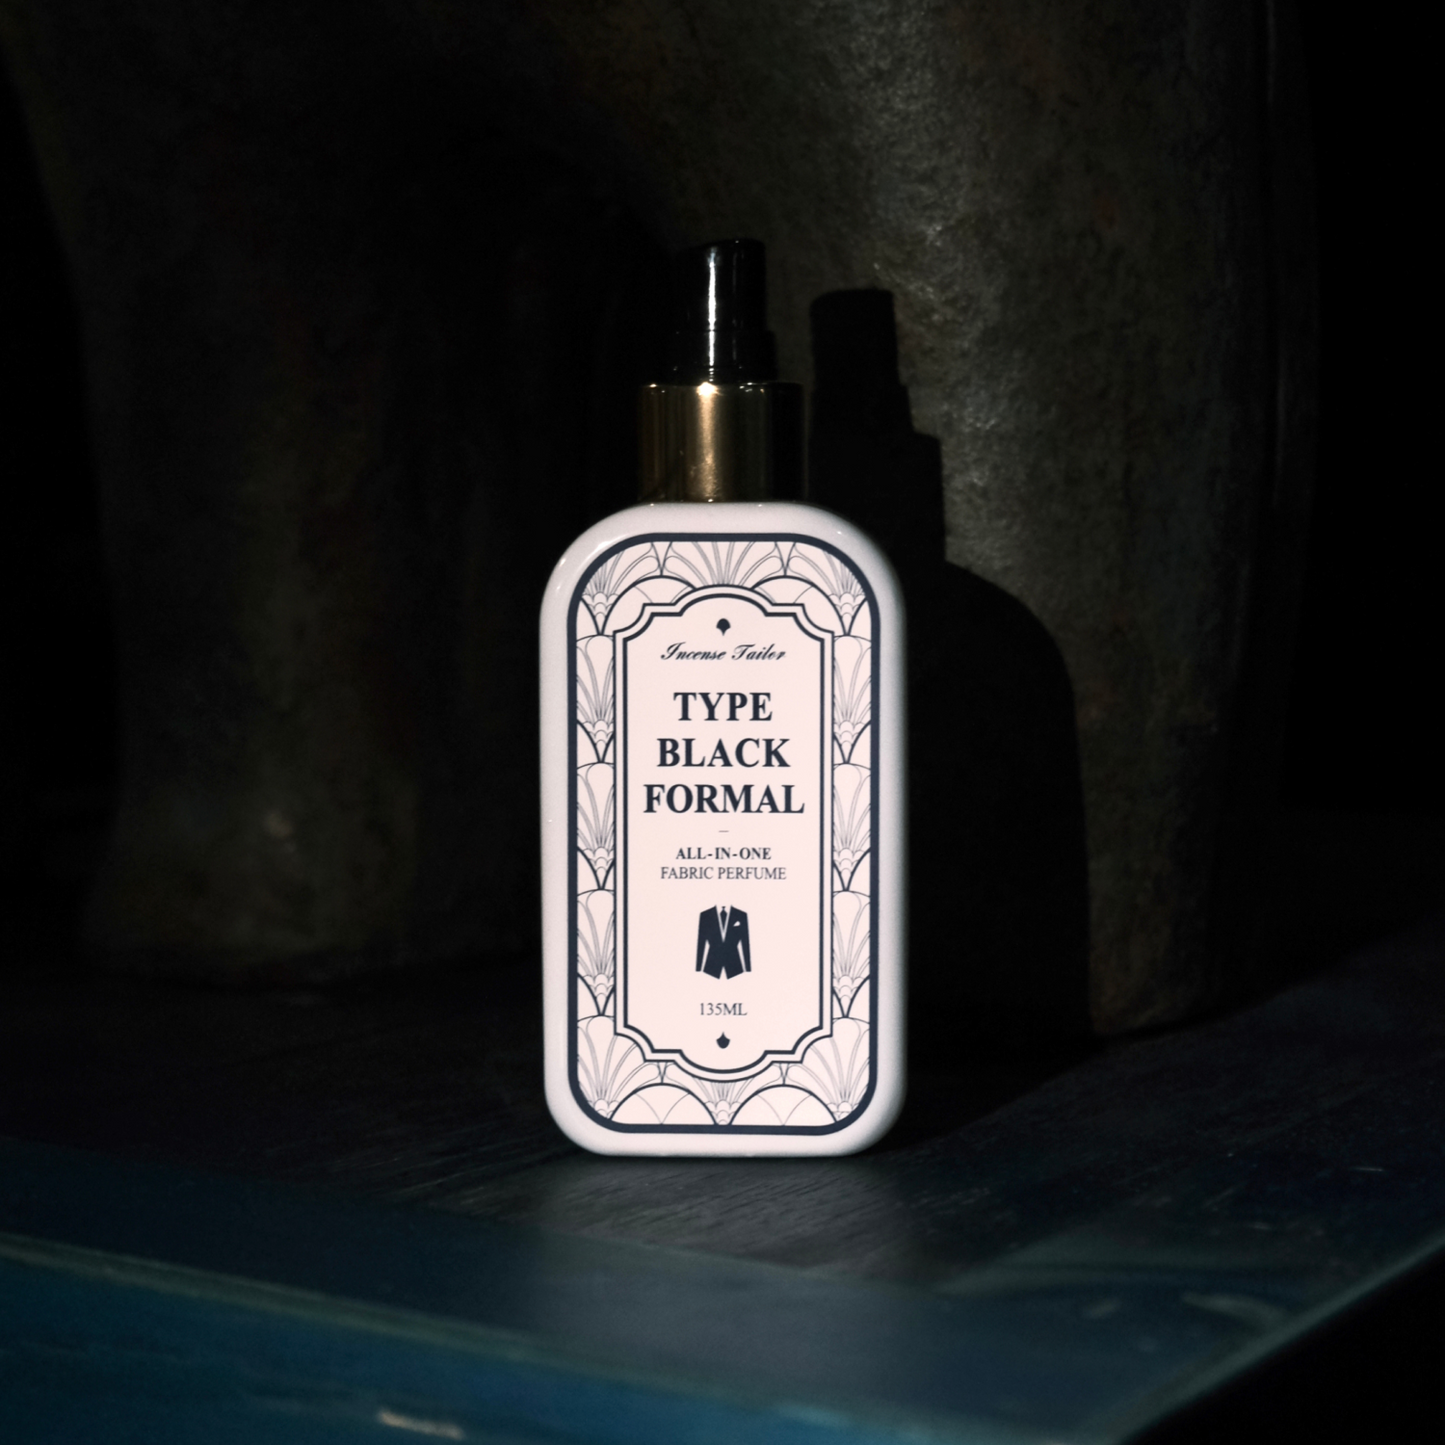 Pheromone Fabric Perfume : Cleanse, crave, conquer the night! | Incensetailor